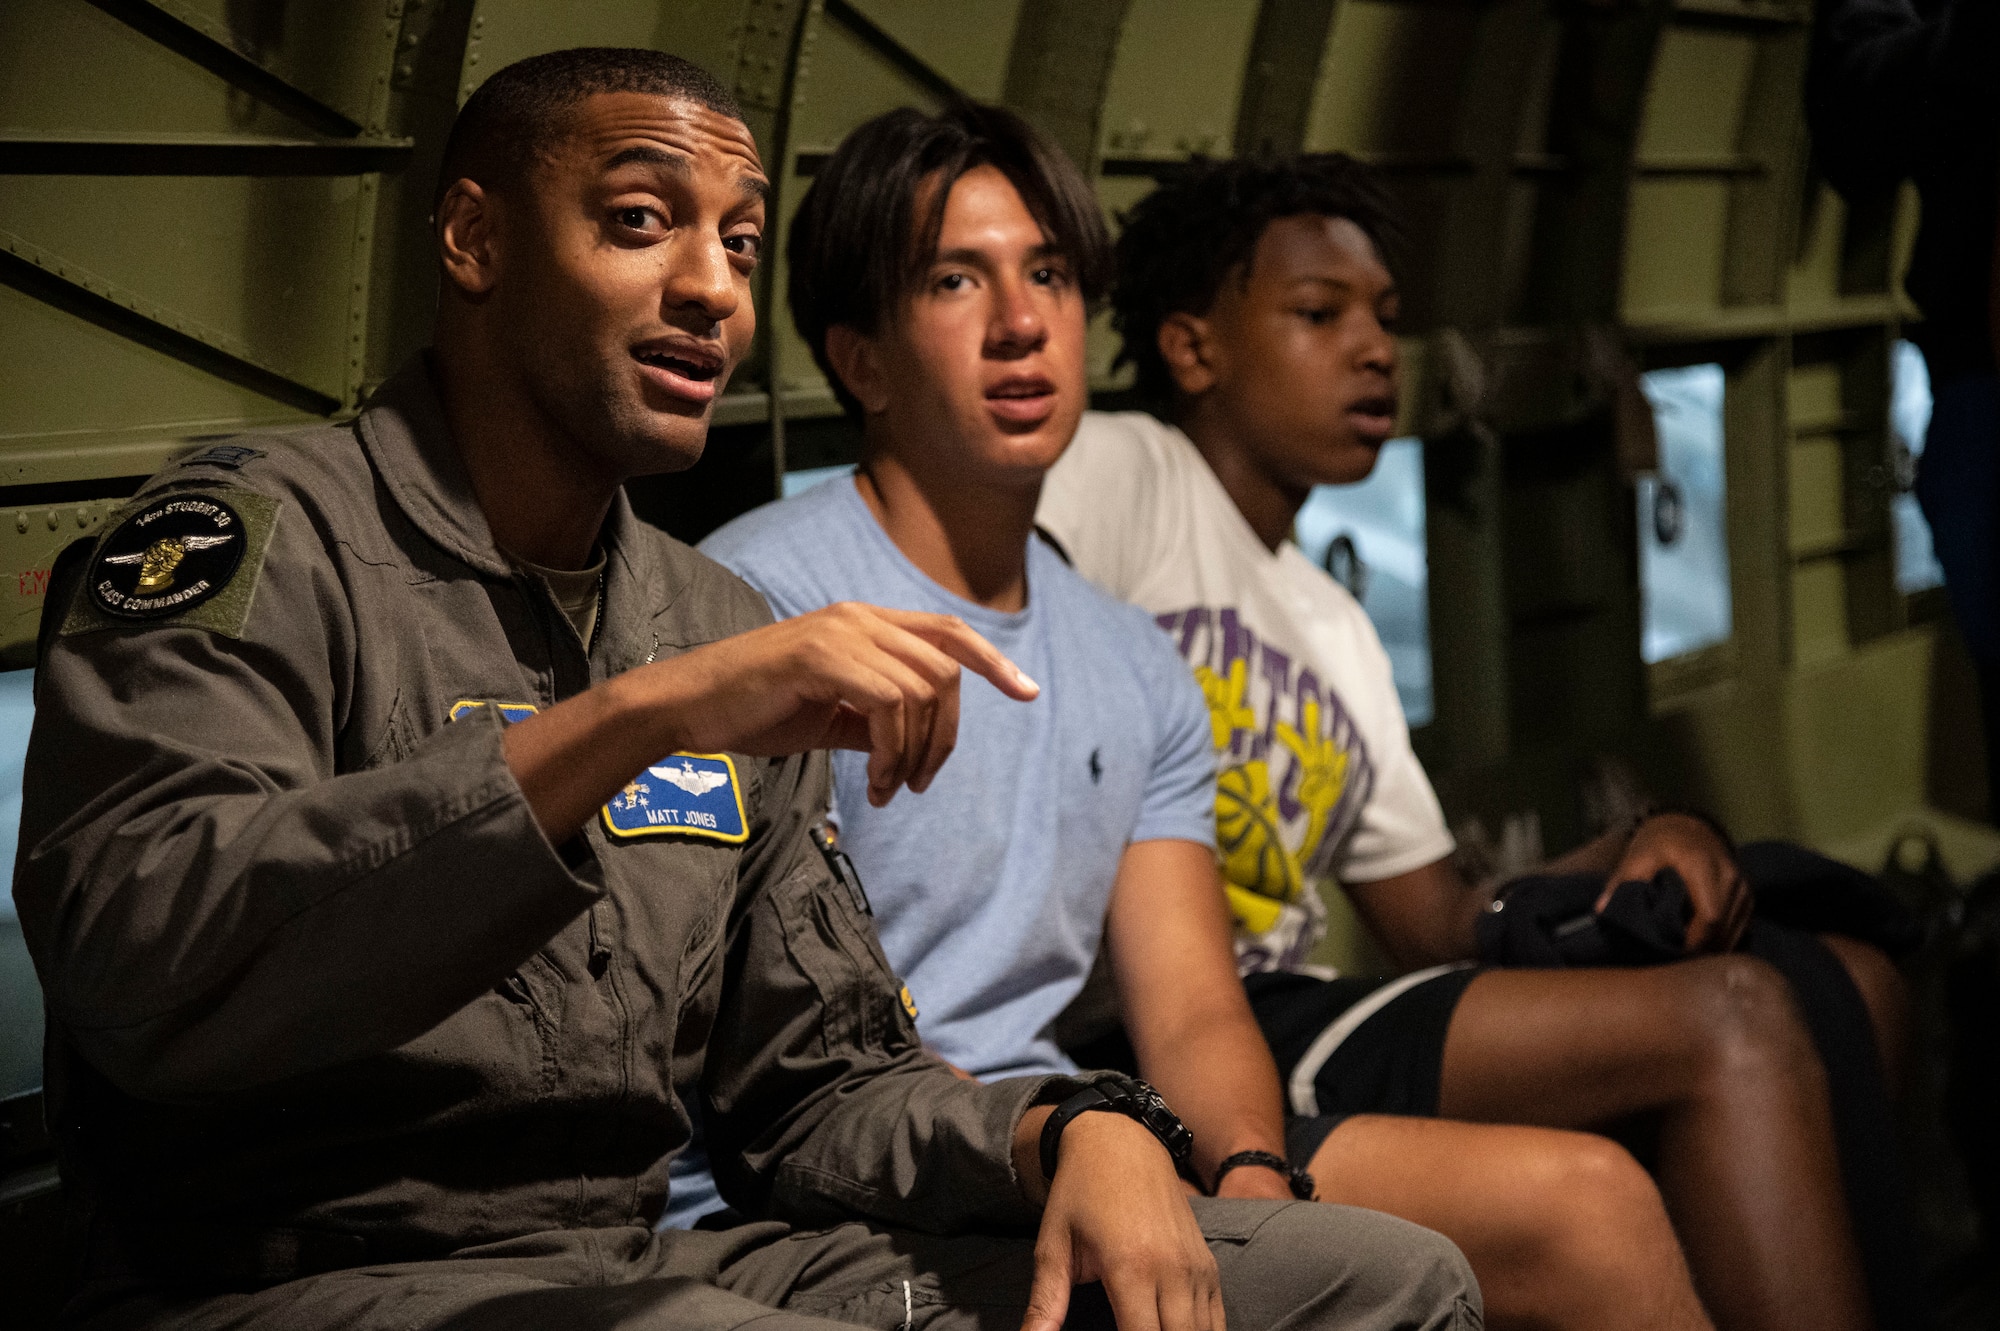 Capt. Matthew Jones, 14th Student Squadron T-6 instructor pilot, talks to students from the Organization of Black Aerospace Professionals during an immersion tour at the Air Mobility Command Museum in Dover, Delaware, June 21, 2022. Along with being the assigned group mentor, Jones gave students personal insight into the military lifestyle and his own experiences as a member of the aviation community in the Air Force. (U.S. Air Force photo by Staff Sgt. Marco A. Gomez)